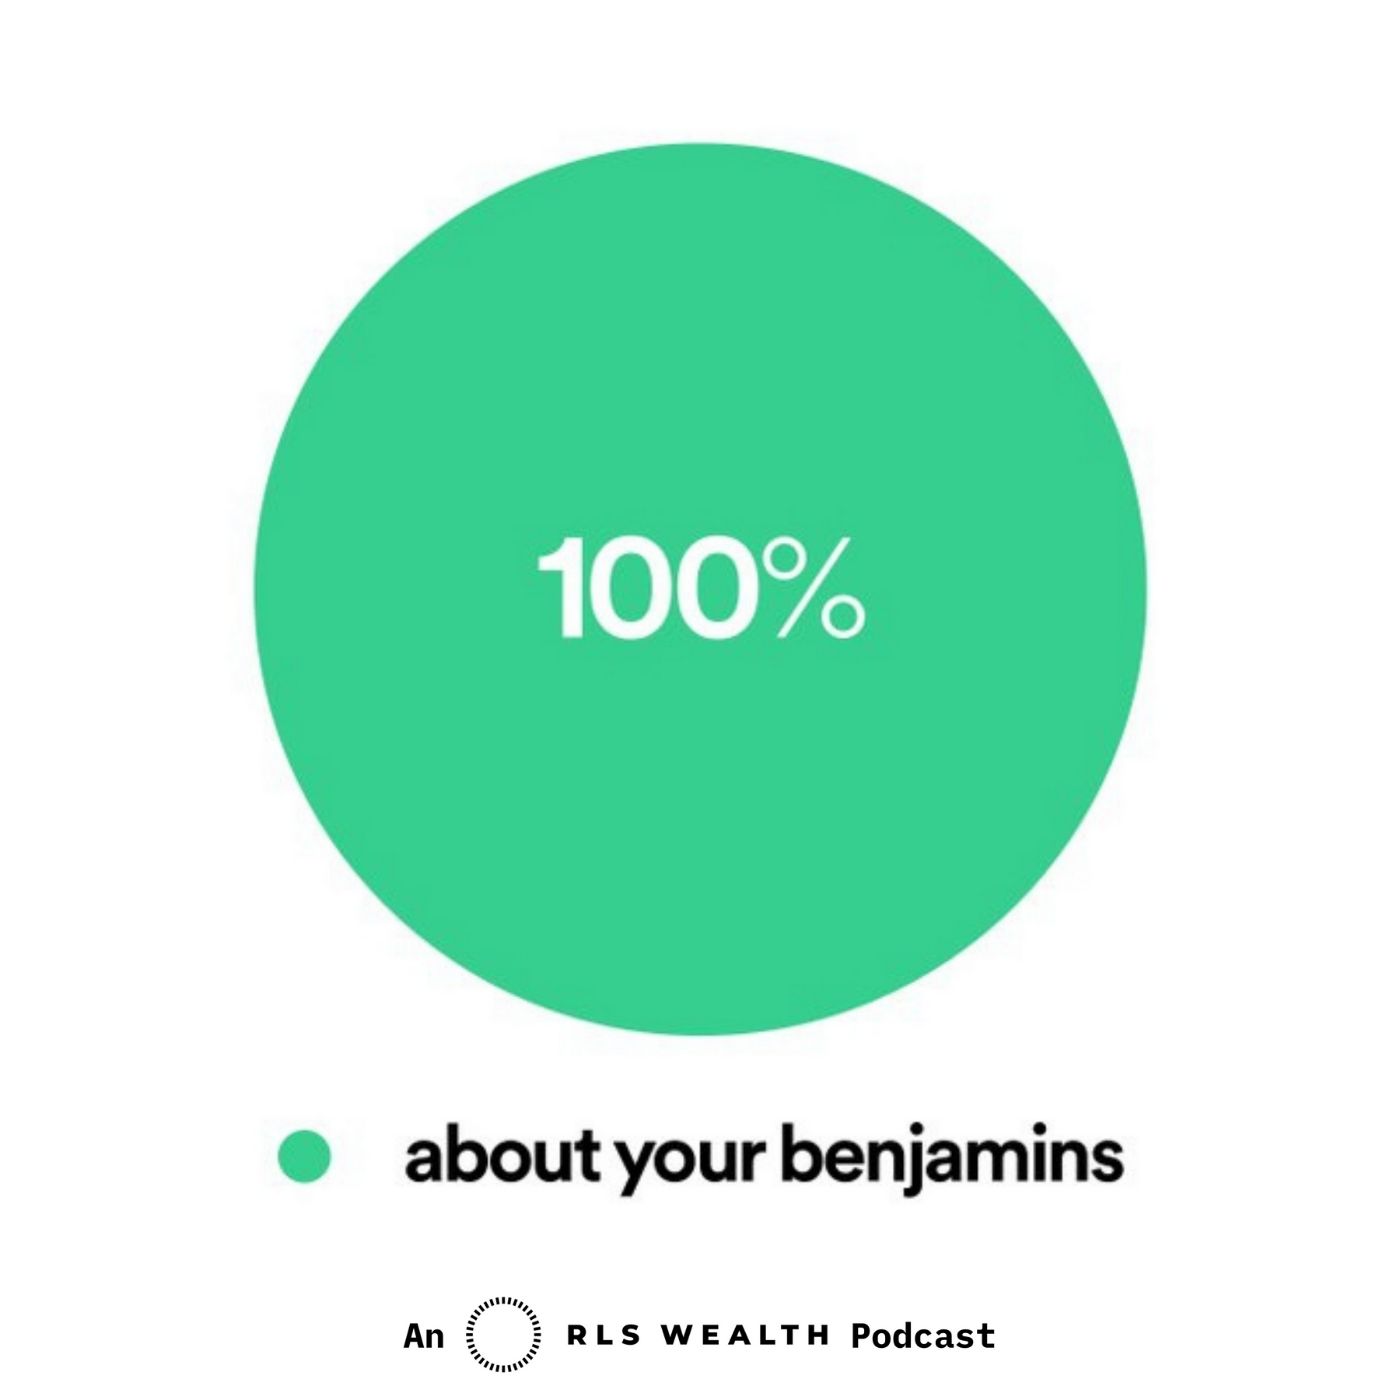 All About Your Benjamins™